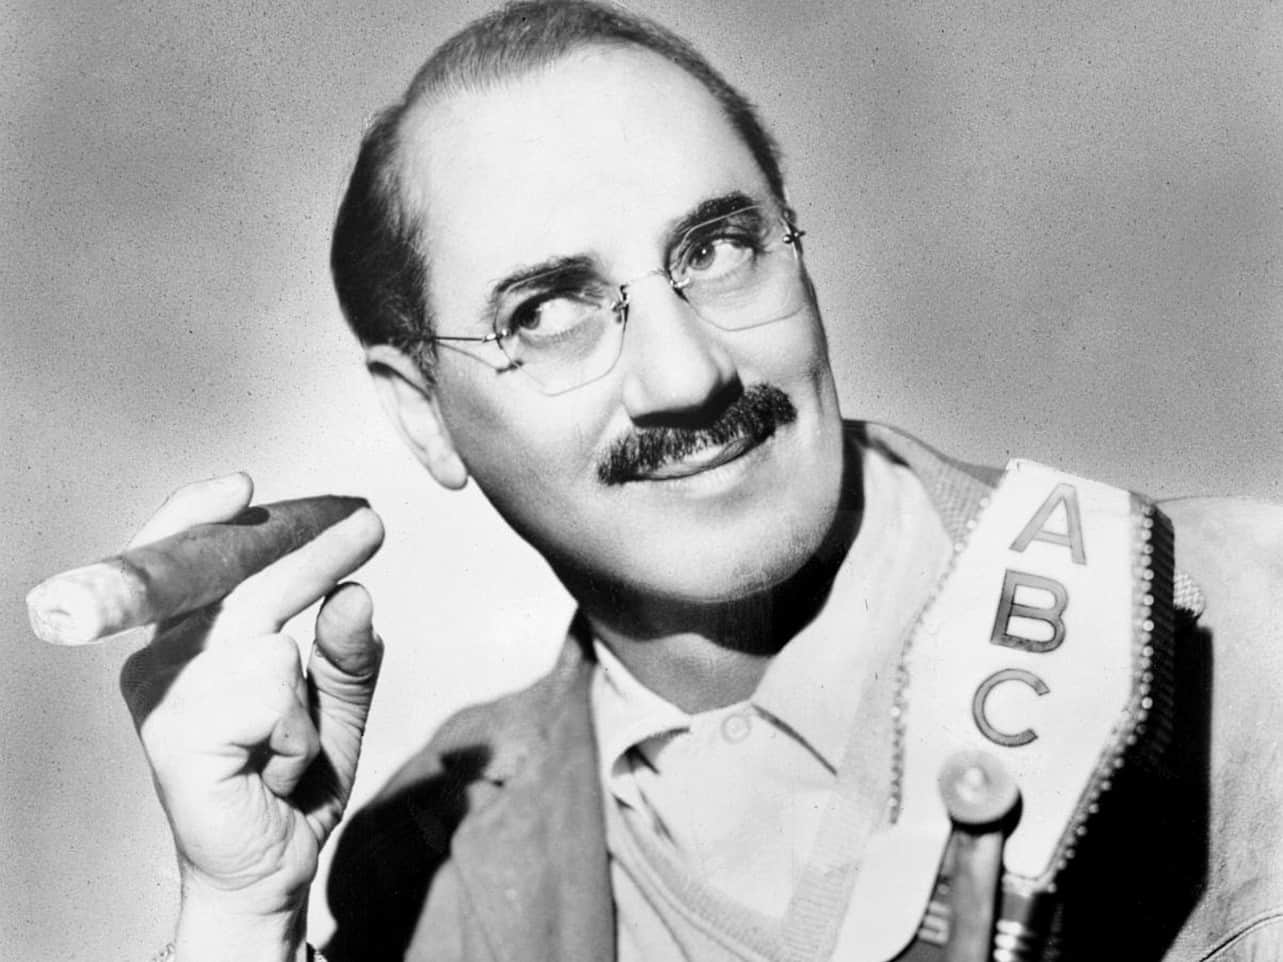 One of Groucho Marx's early radio gigs was a brief series called "Flywheel, Shyster and Flywheel" in 1932